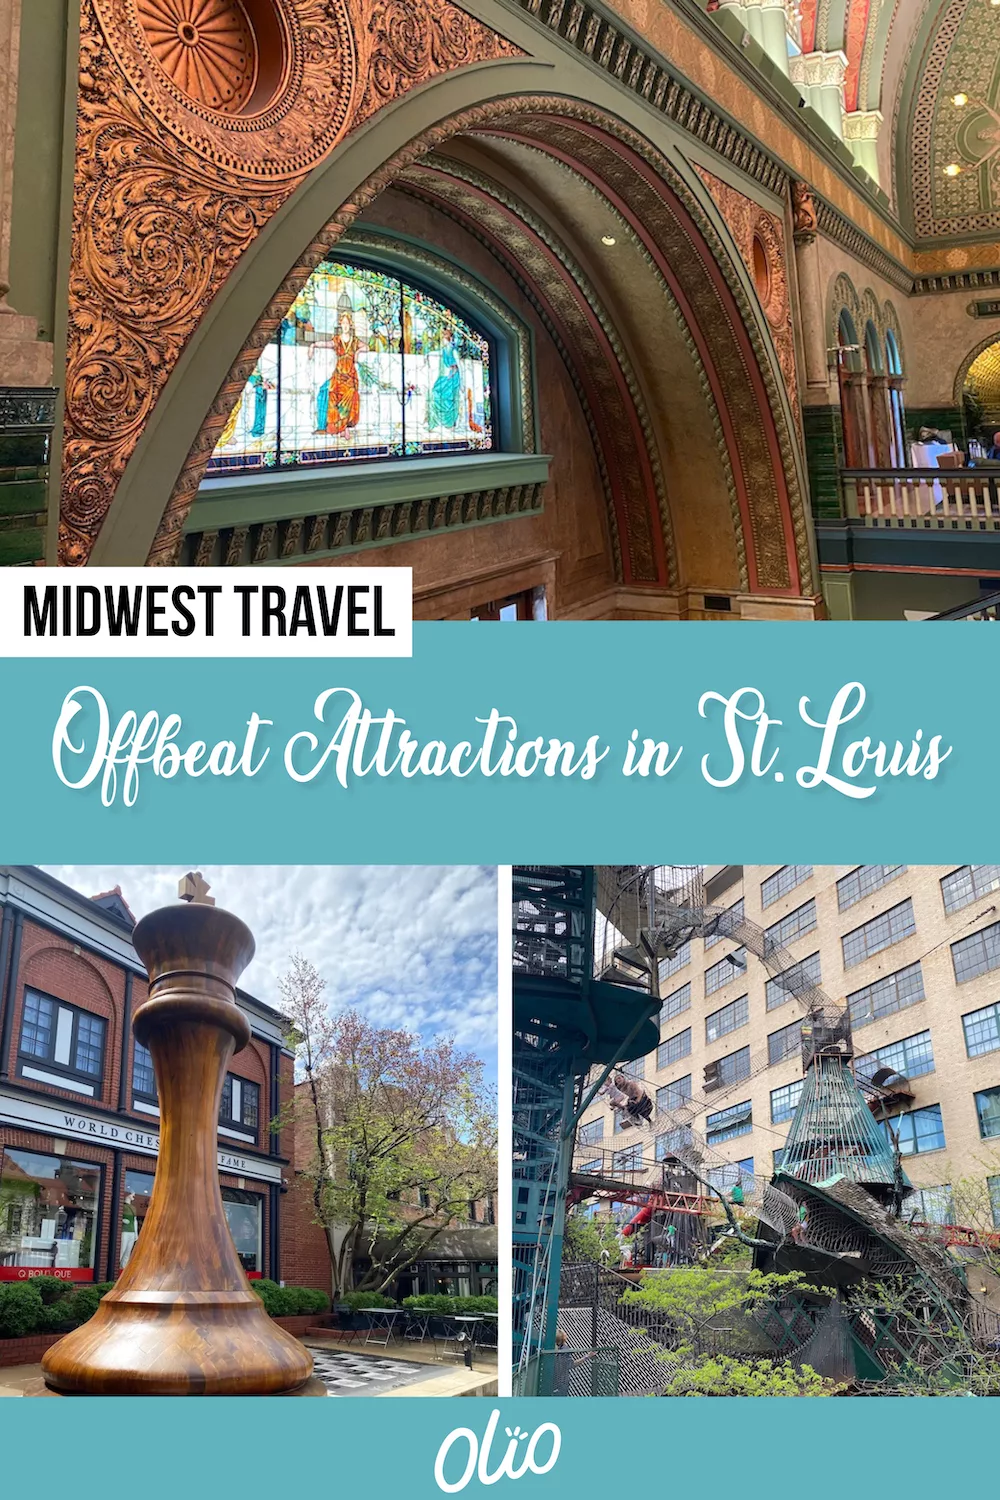 There's no shortage of offbeat attractions in St. Louis, Missouri. From whimsical, labyrinth-like places like the City Museum and giant attractions like the World's Largest Chess Piece to architectural anomalies and unique local history, this Midwest city is teeming with quirky places to visit. Whether you have time for a quick photo op or an afternoon to fill exploring, these unusual spots across the city are sure to add a bit of kitsch and whimsy to your visit.